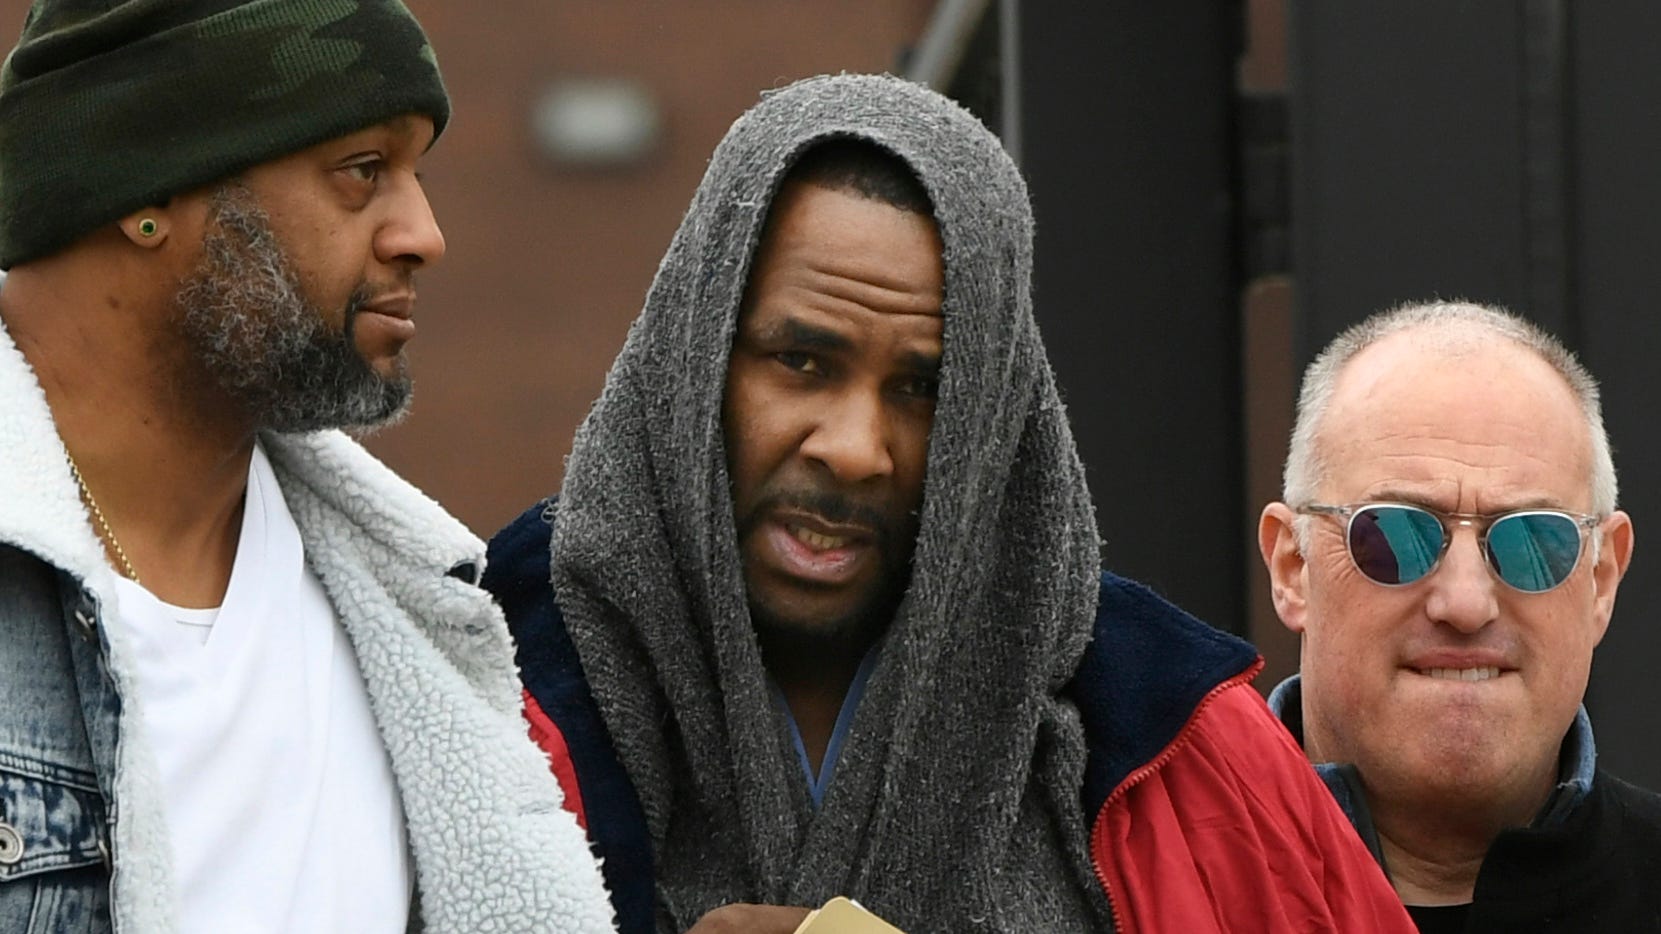 R. Kelly released from jail after child support payment made